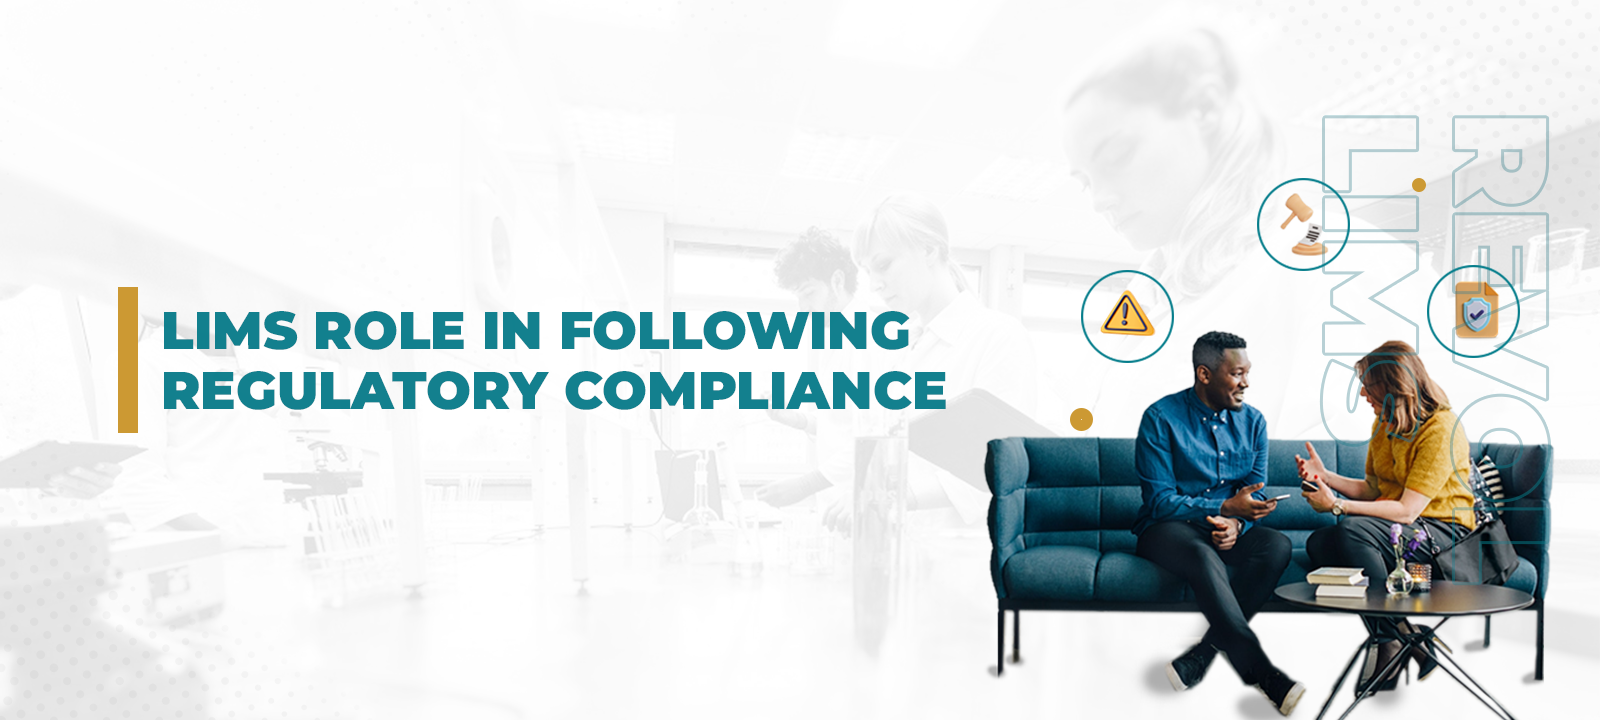 An image displaying a banner with icons that drive regulatory compliance. 